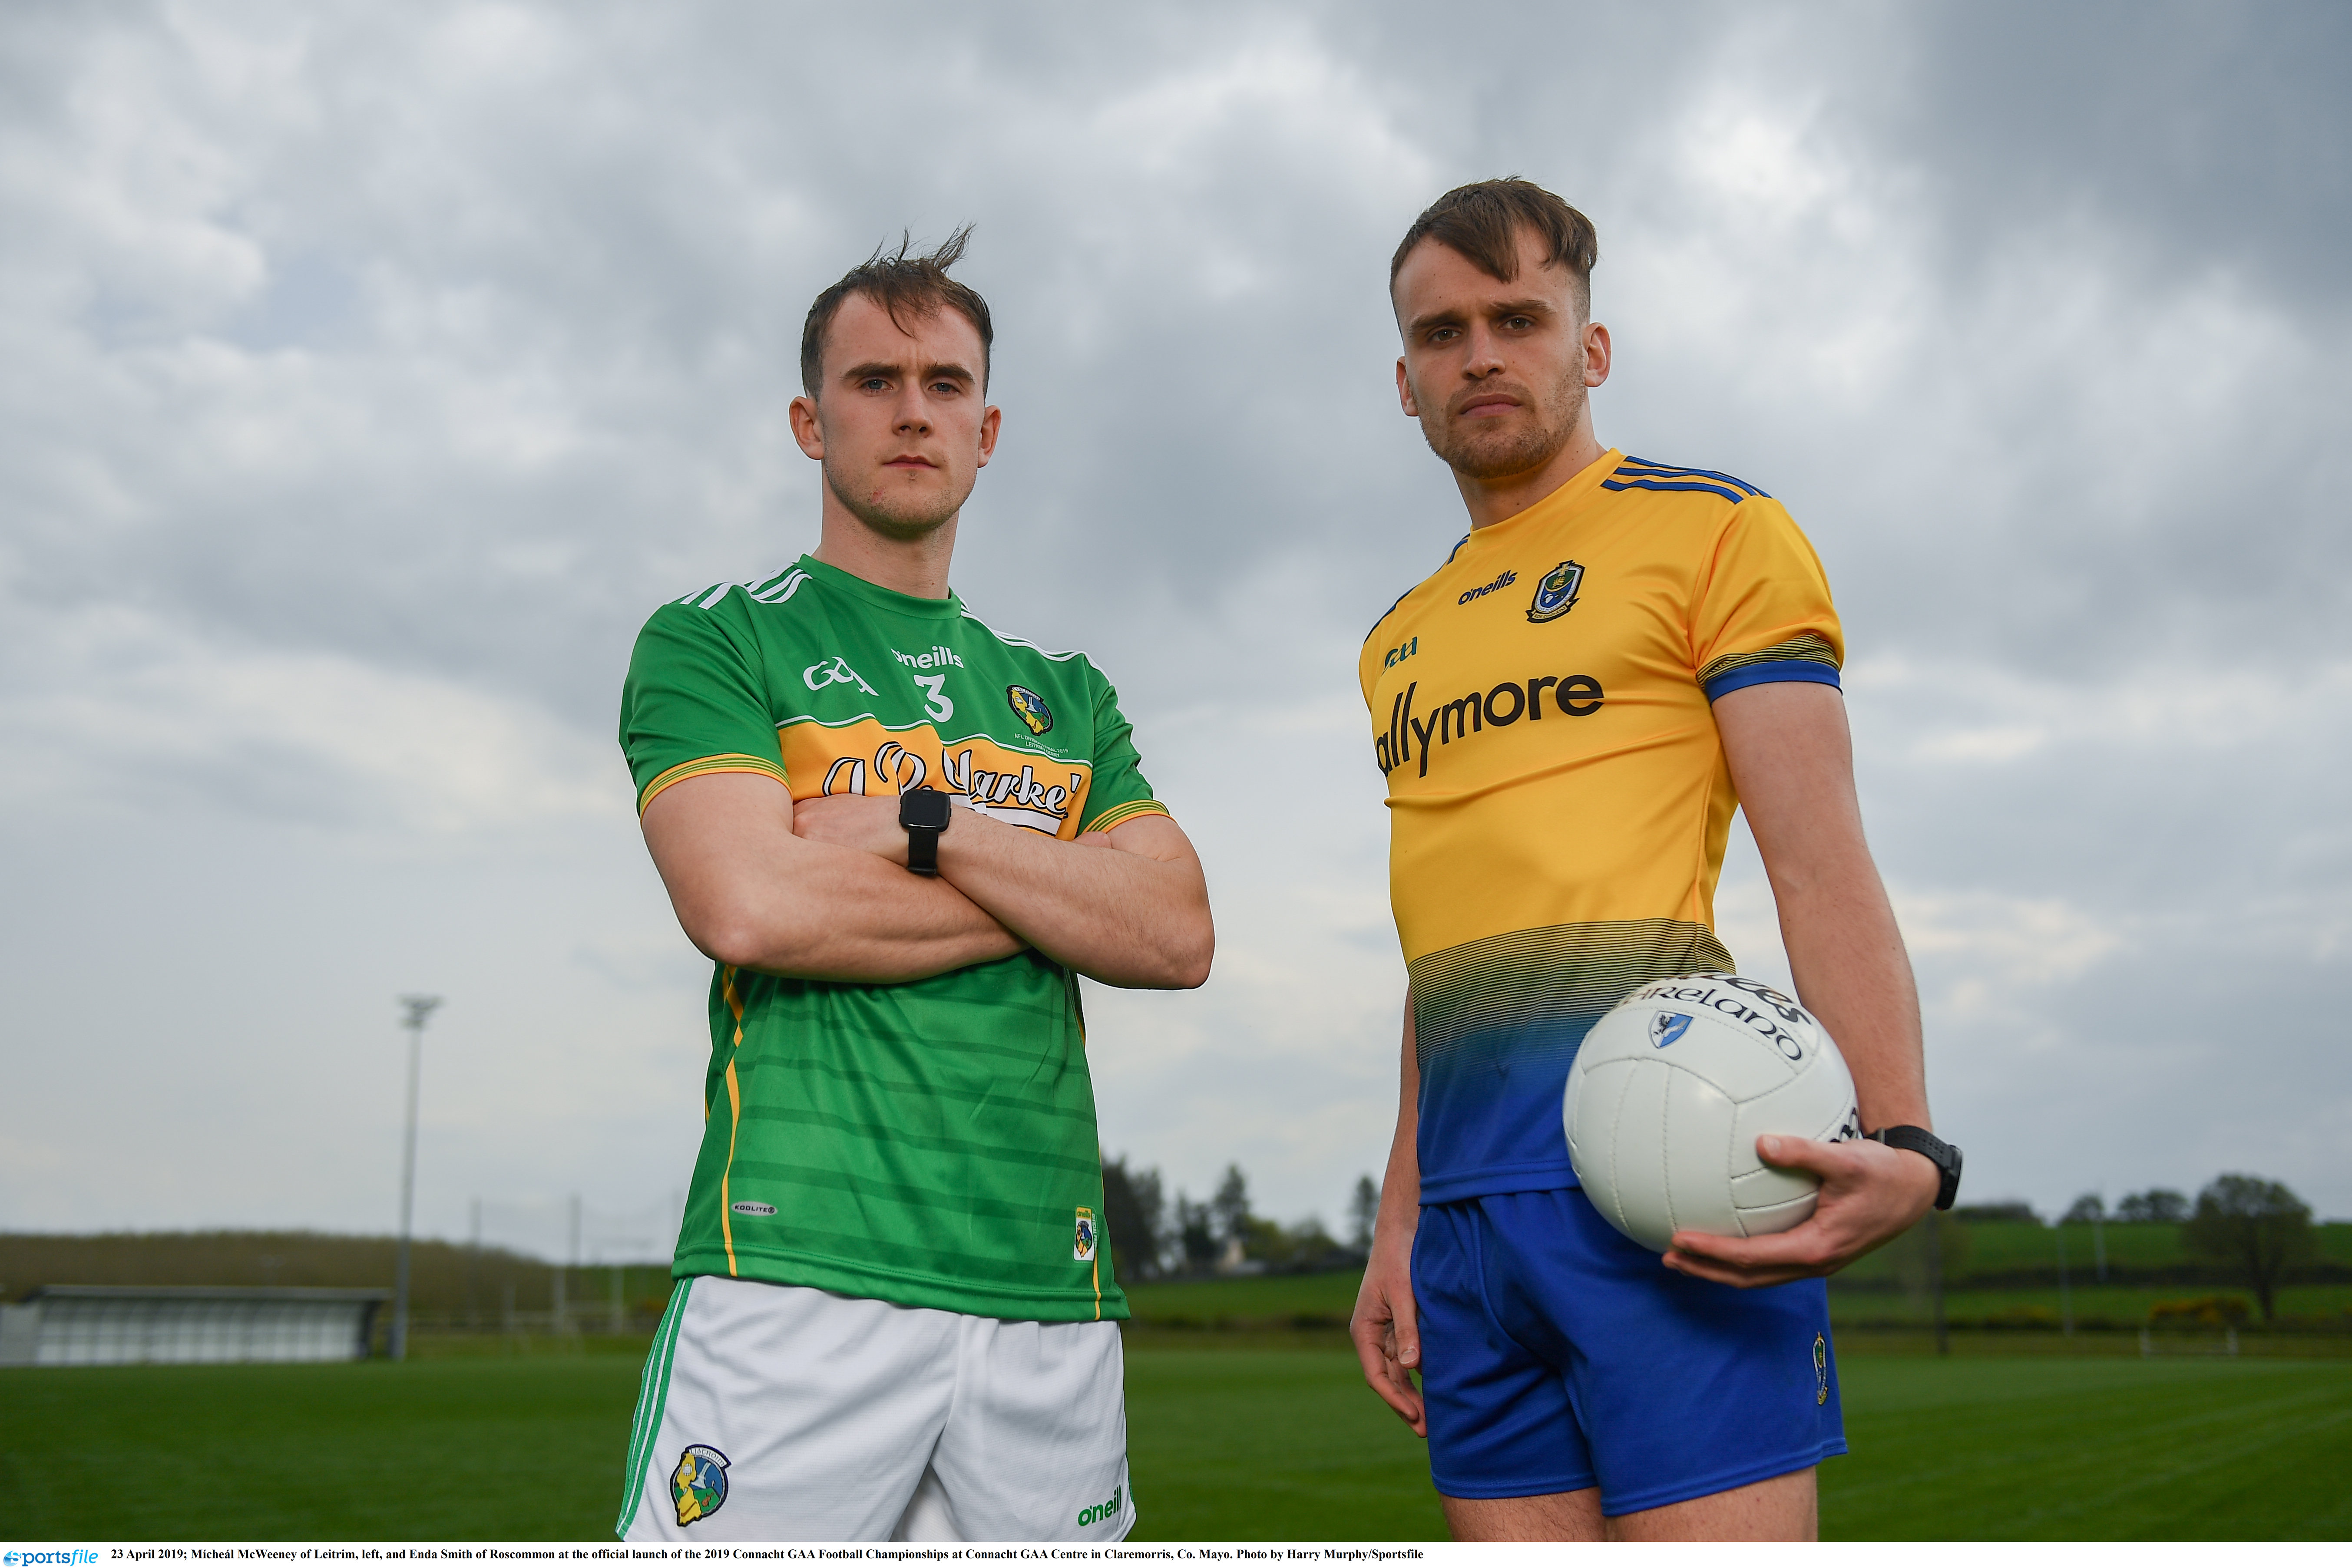 Roscommon and Leitrim Name Teams for Quarter Final Clash